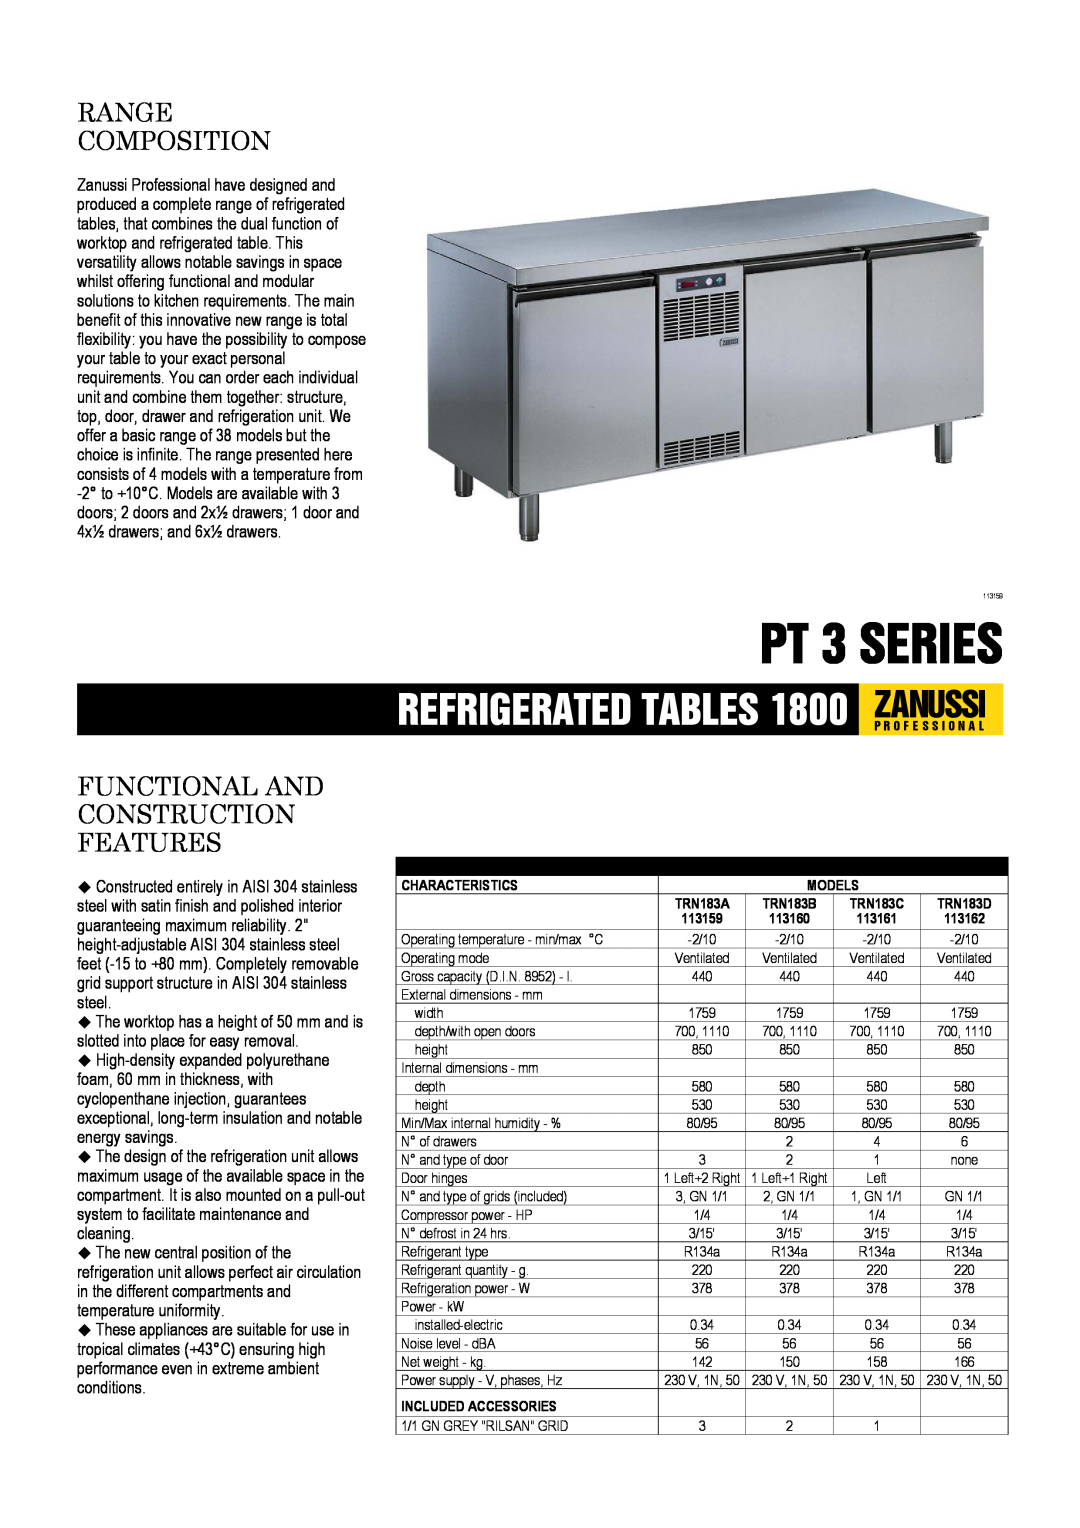 Zanussi 113161, 113160, 113162, 113159 dimensions PT 3 SERIES, Range Composition, Functional And Construction Features 